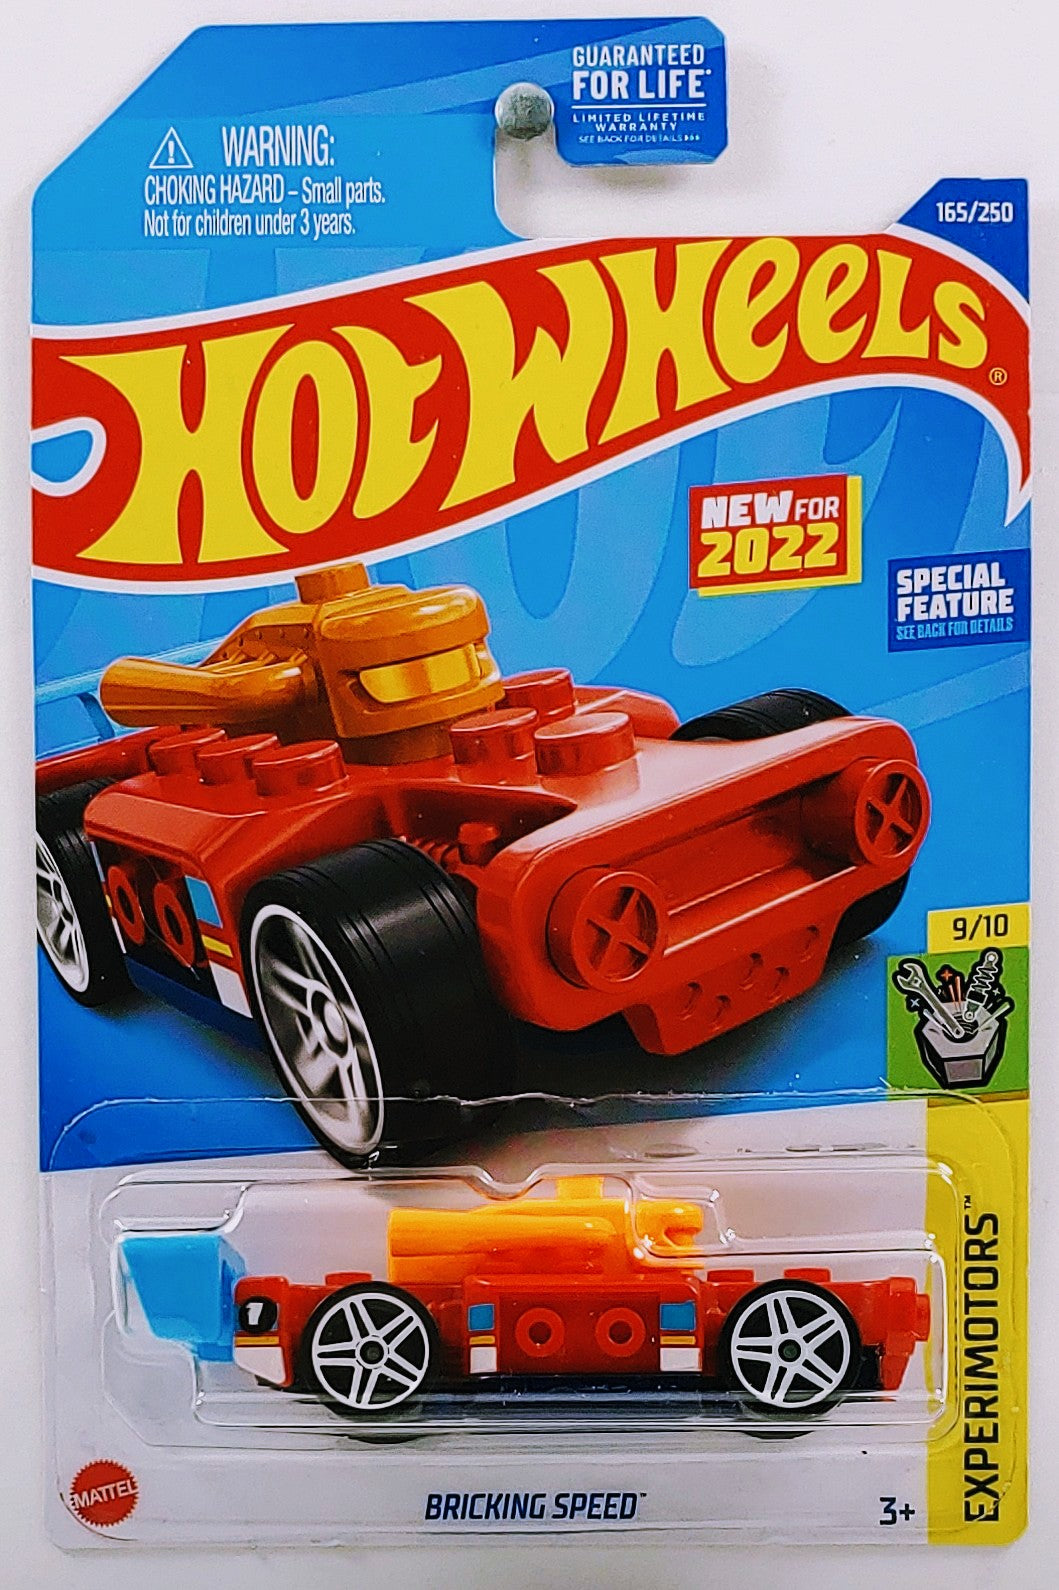 Hot Wheels 2022 - Collector # 165/250 - Expeimotors 9/10 - New Models - Bricking Speed - Red - Lego - USA